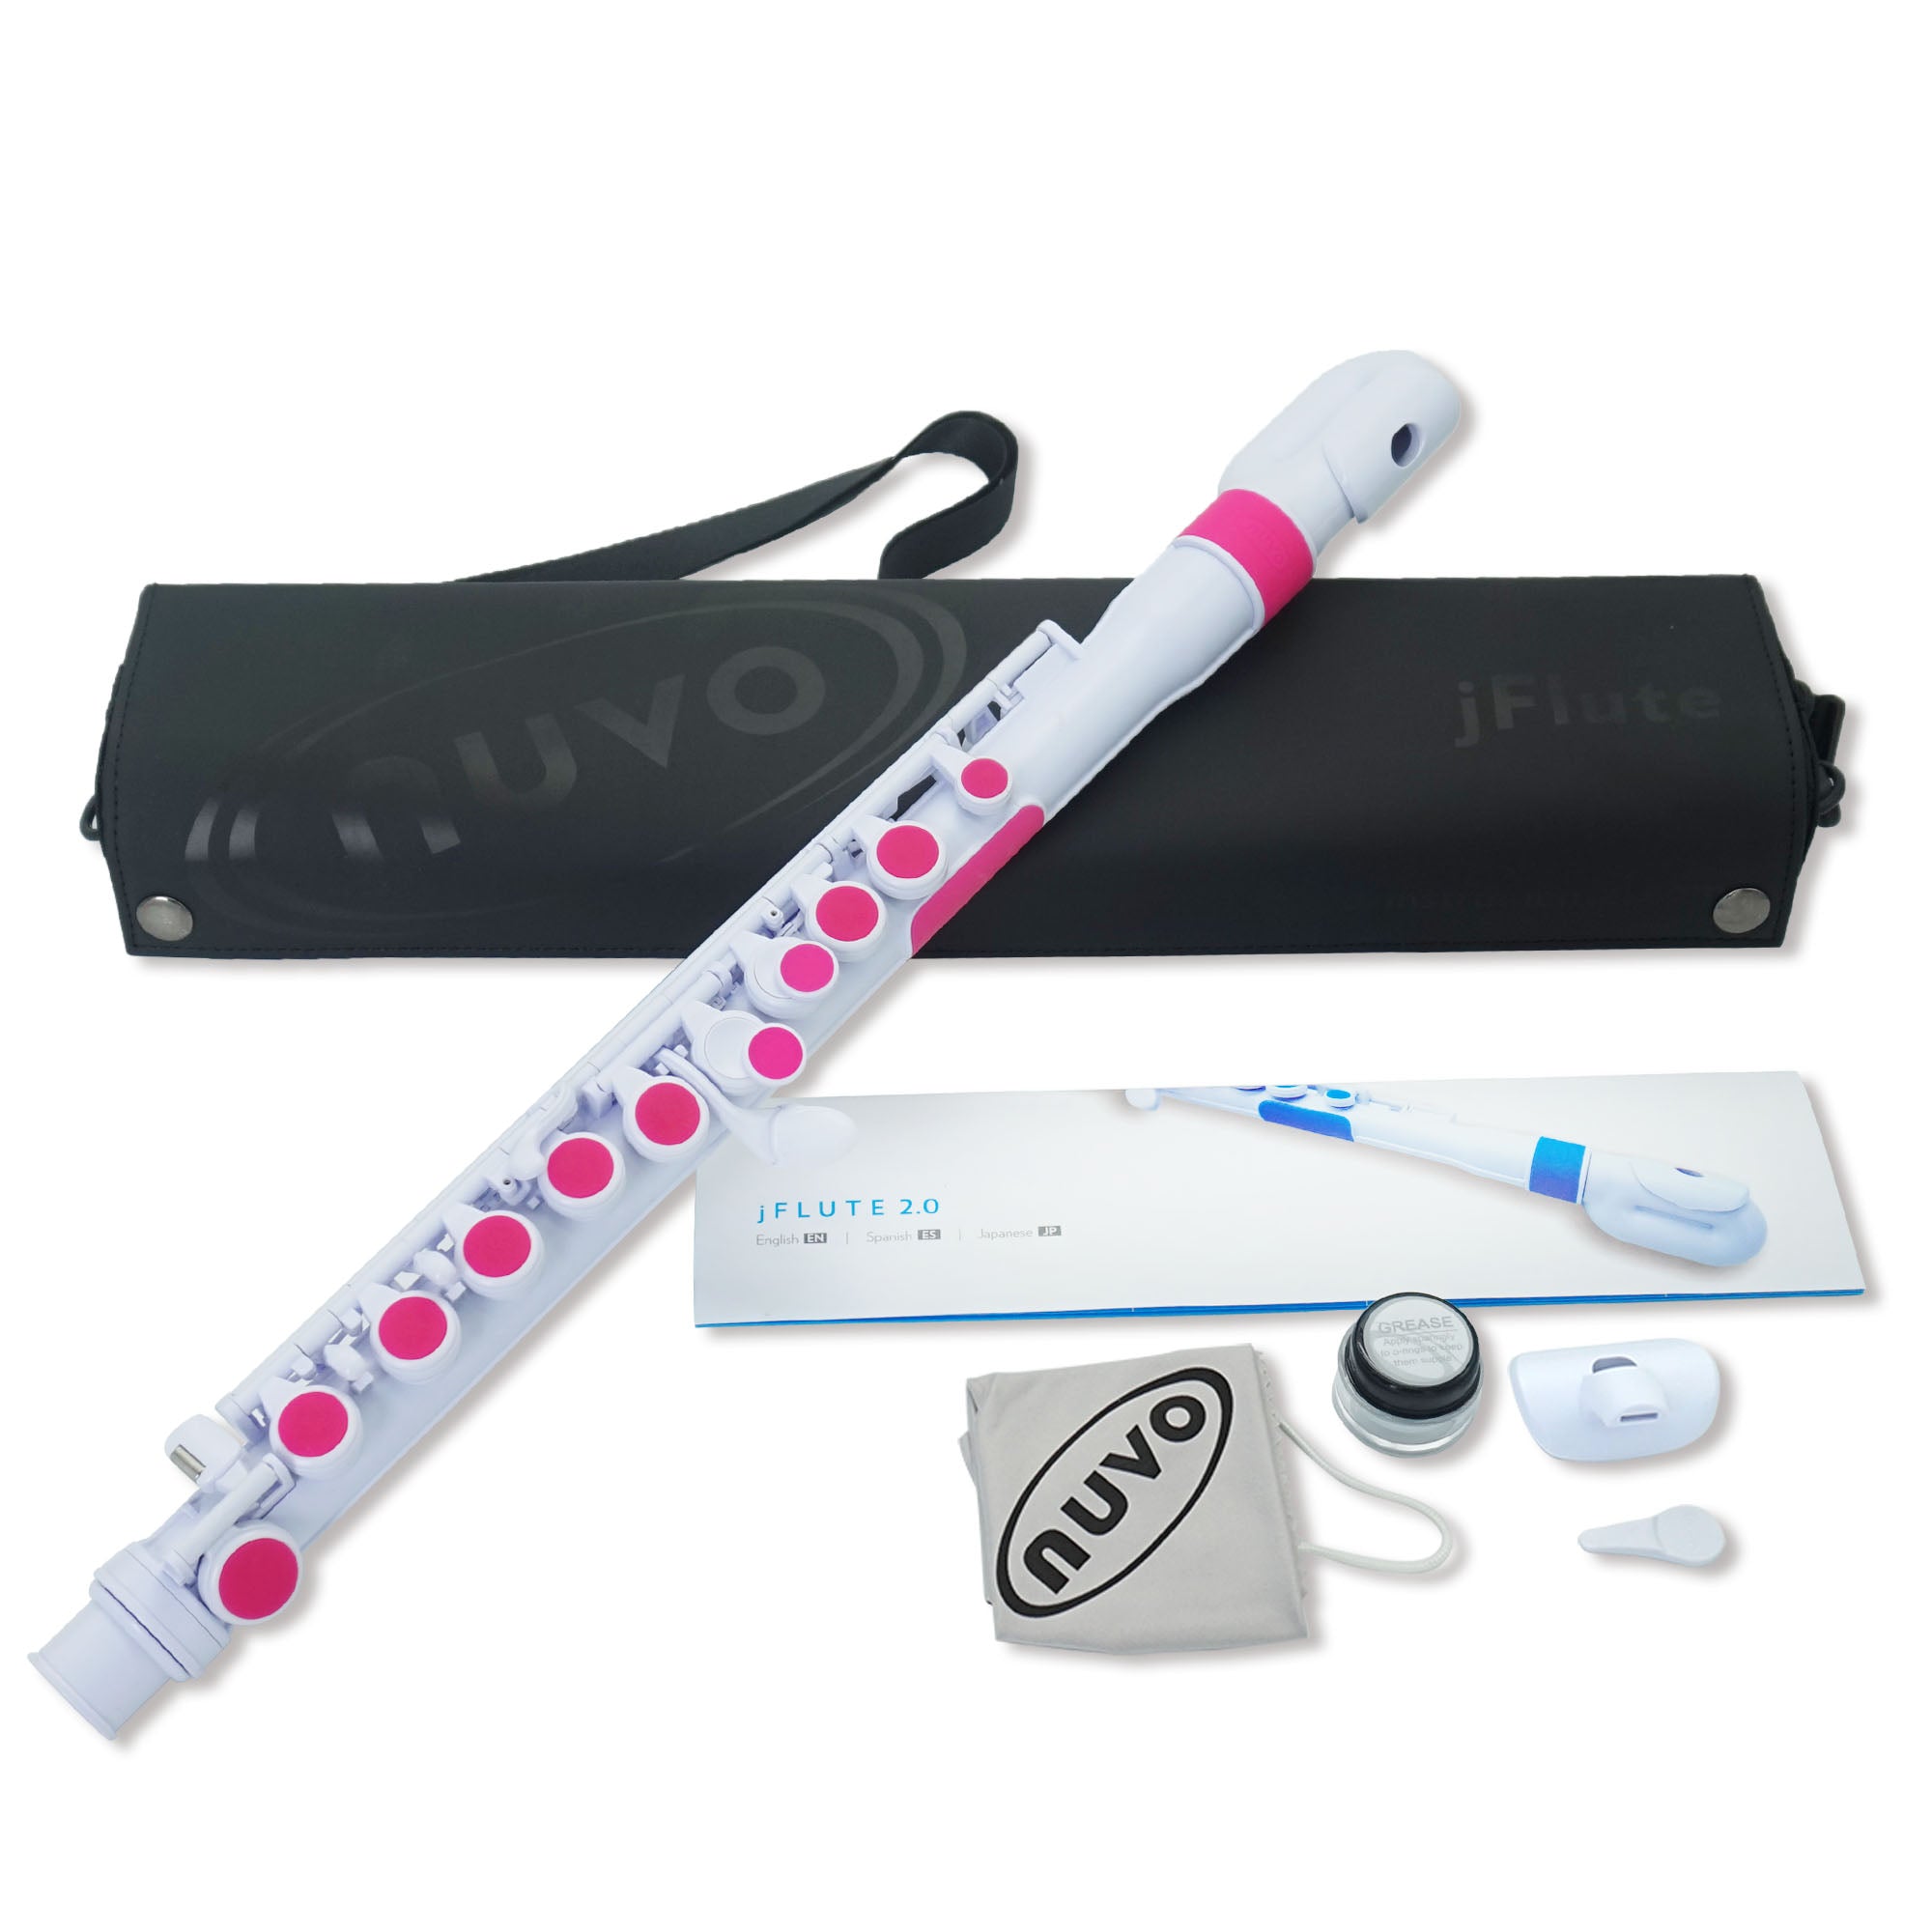 Nuvo jFlute 2.0 with Donut Headjoint (assorted colors)